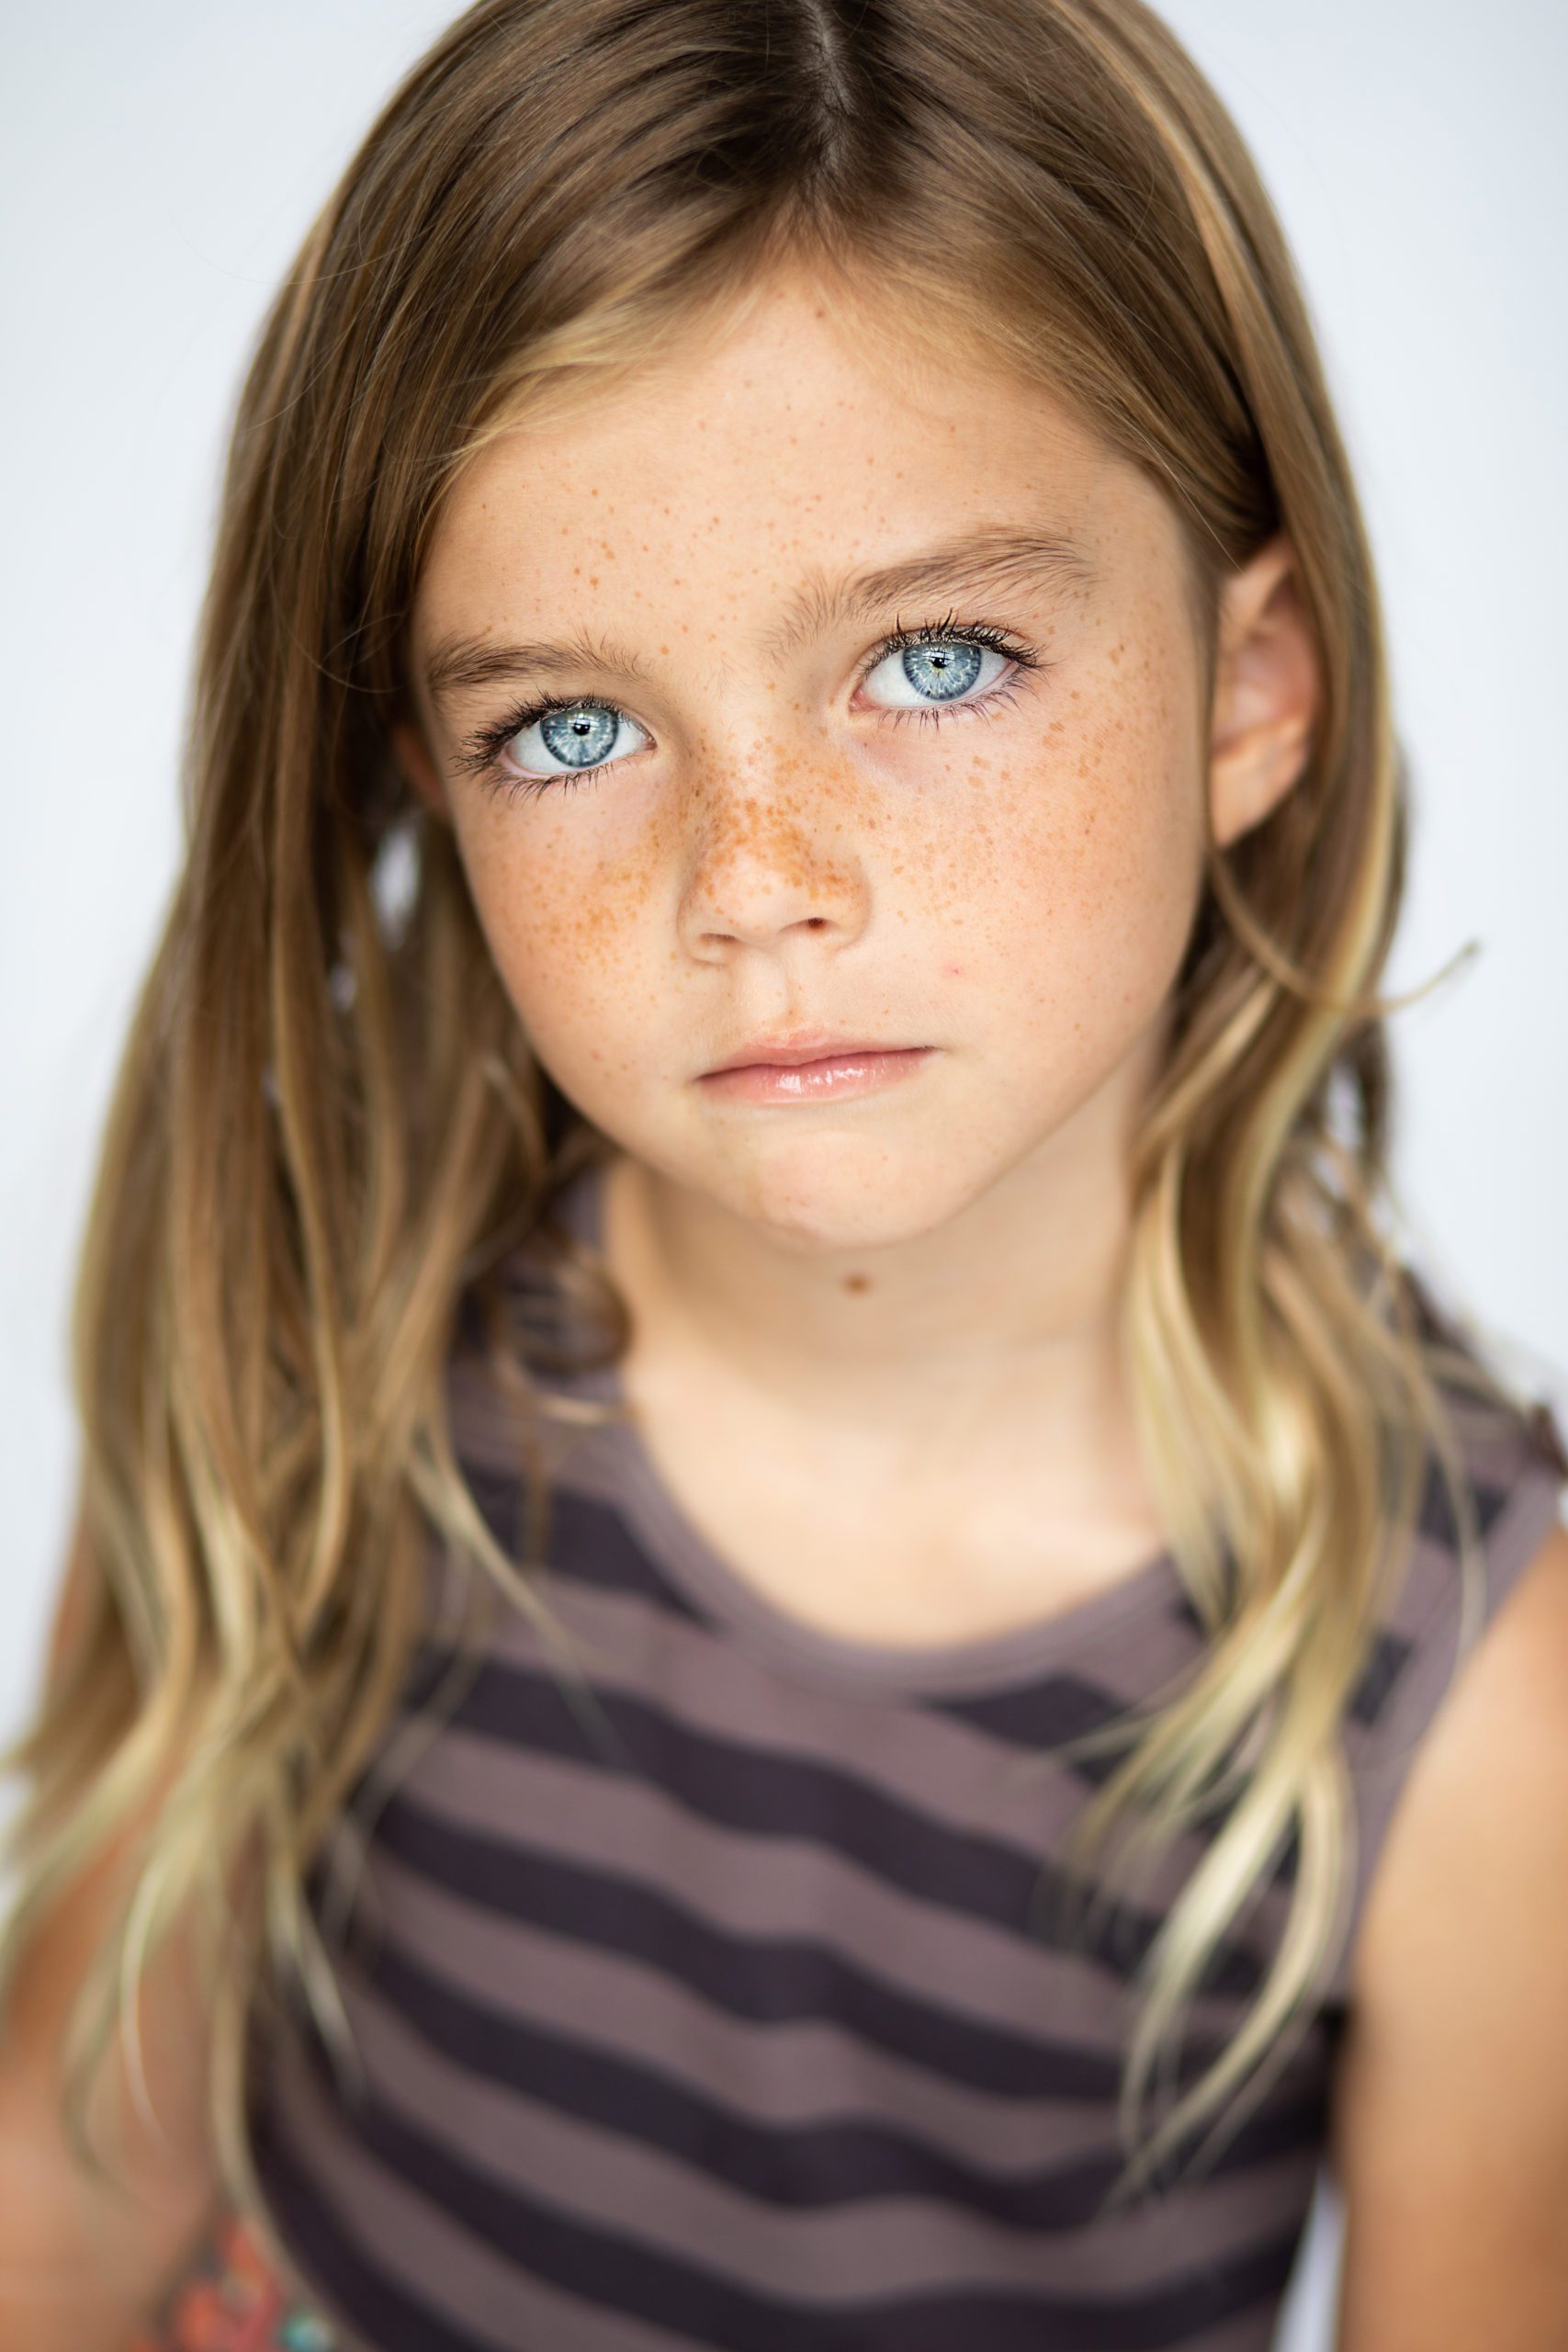 Natalie poses for a kids actor headshot session in Nashville TN, such pretty blue eyes